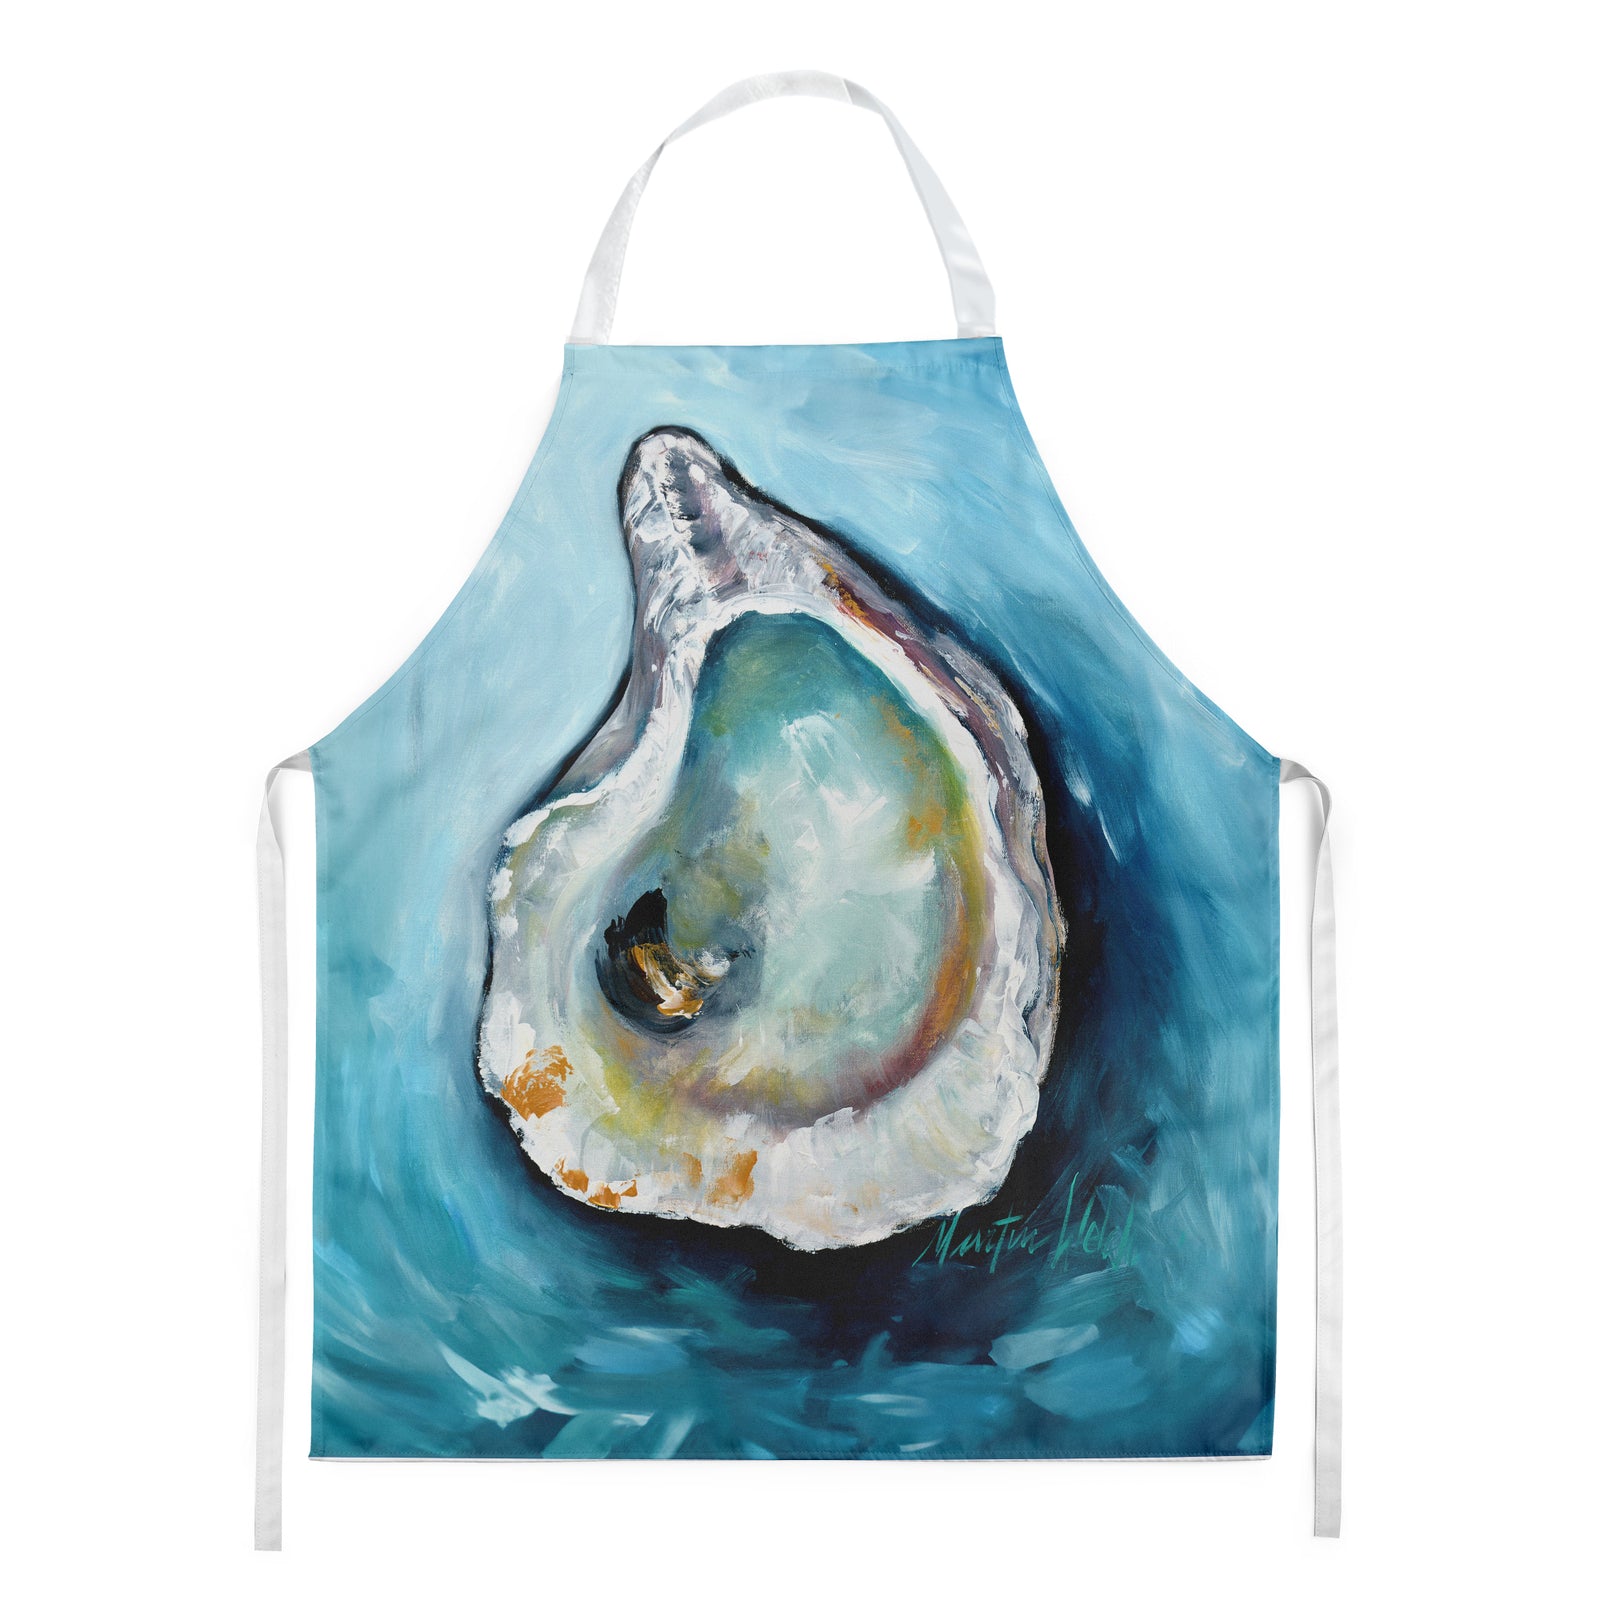 Buy this J Mac Oyster Apron